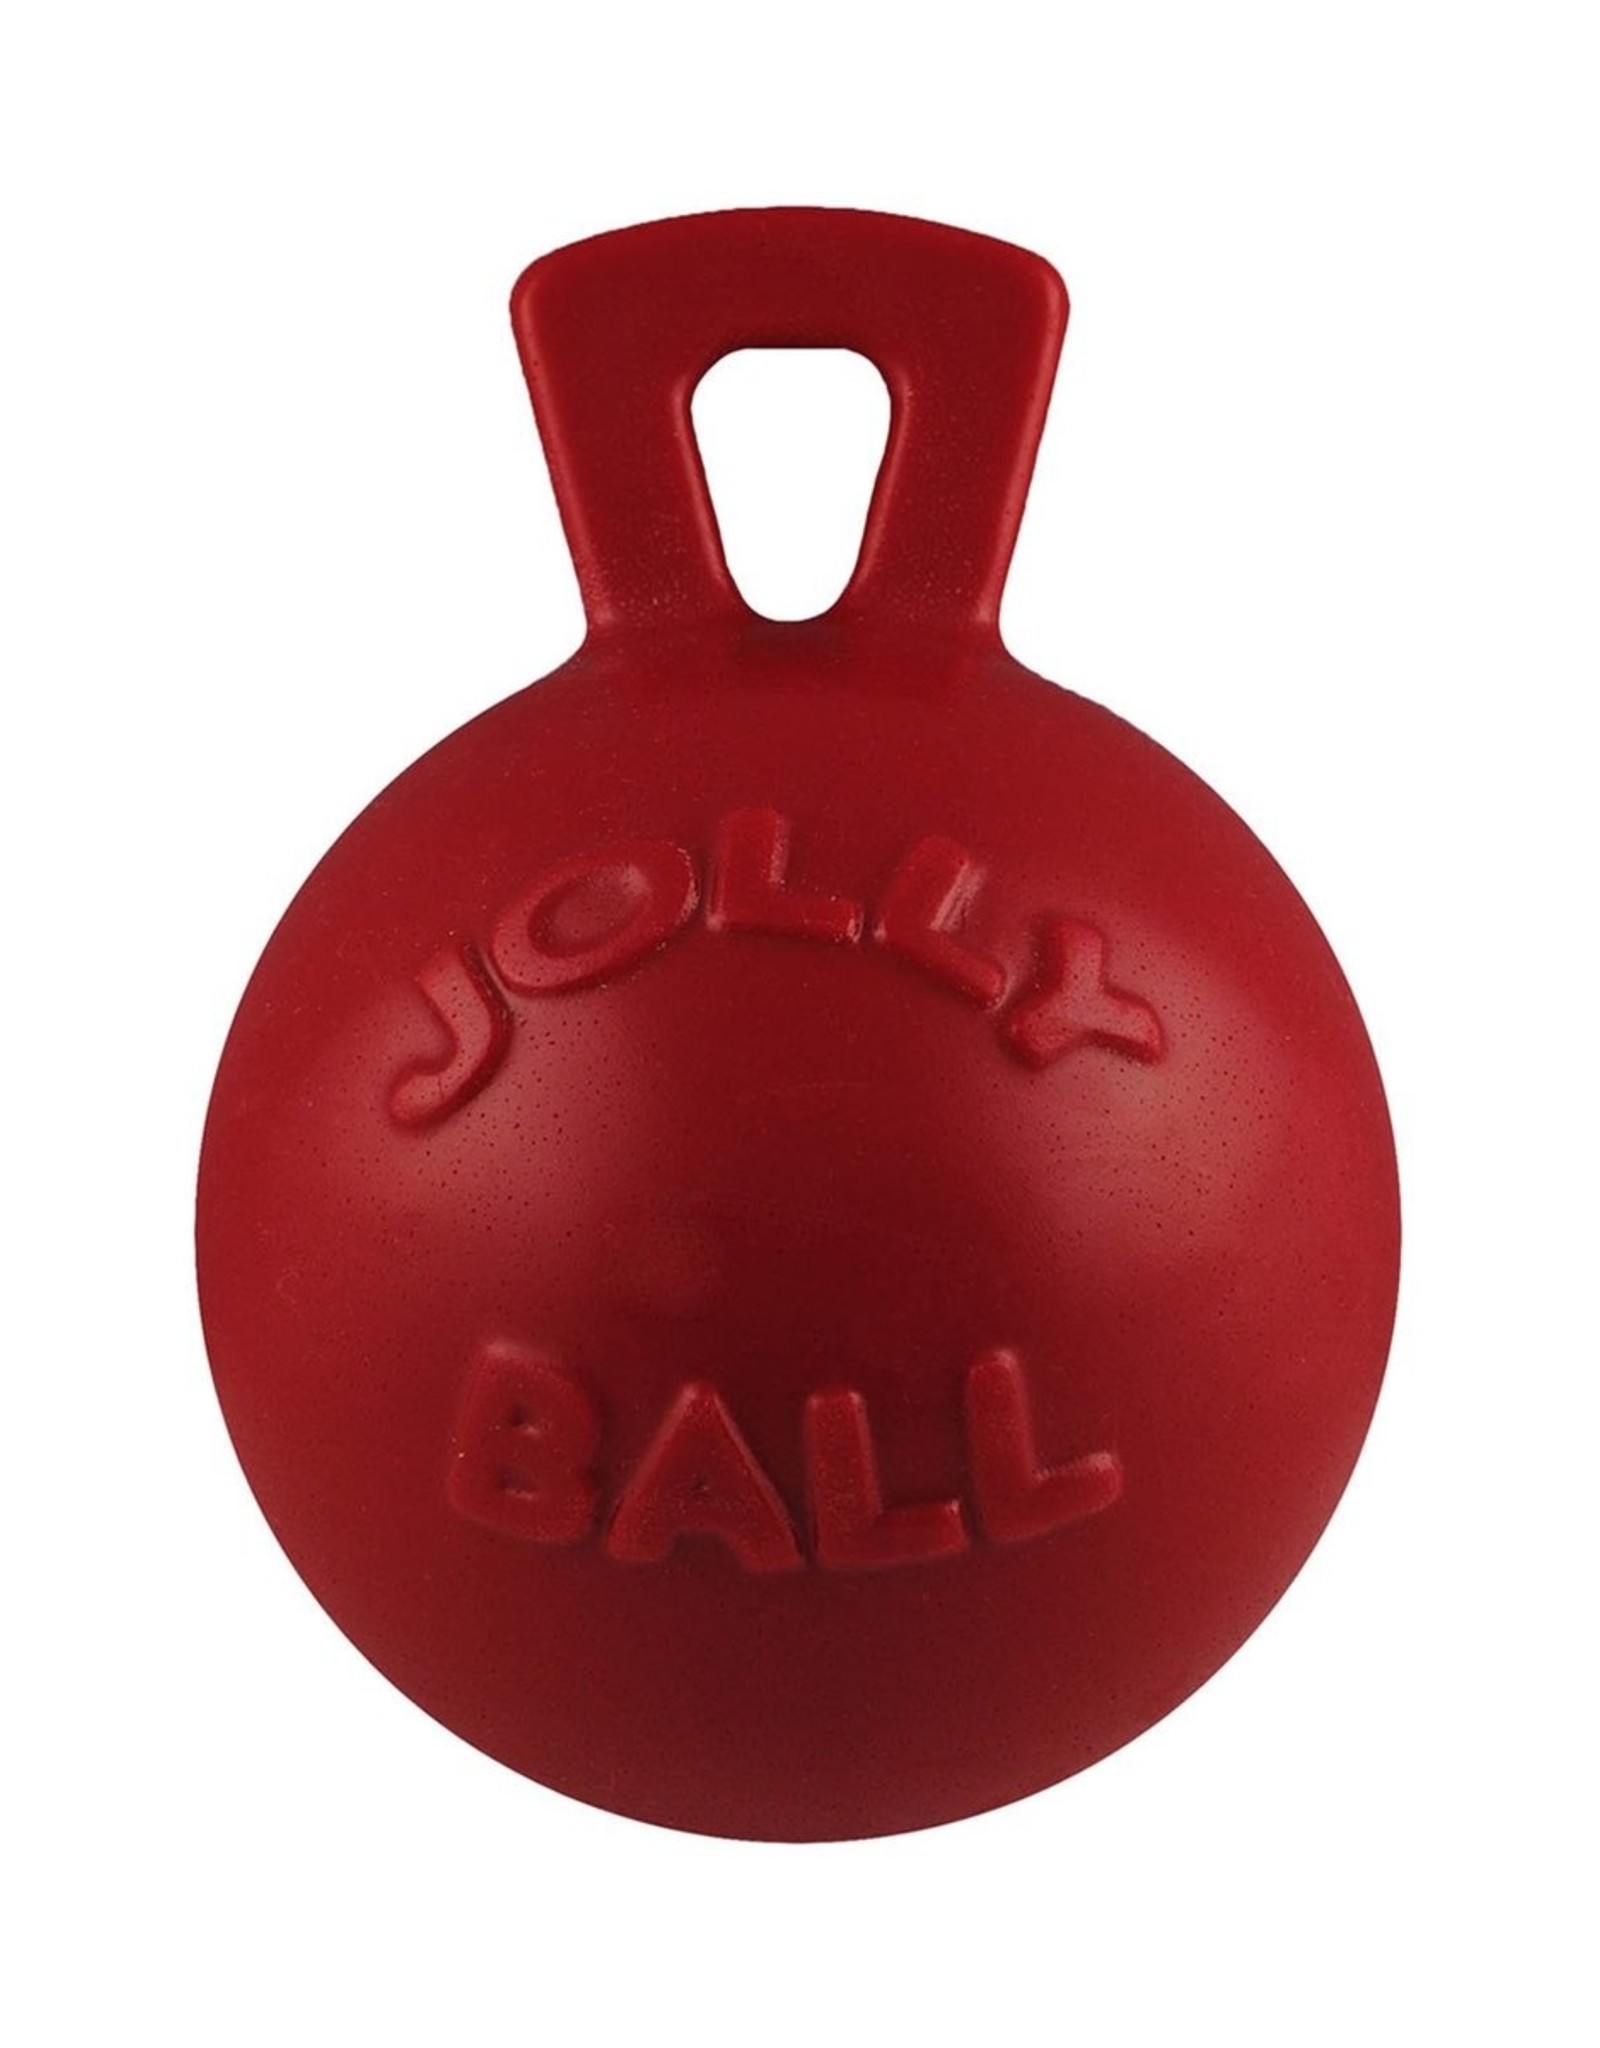 JOLLY PETS JOLLY BALL TUG-N-TOSS  RED 8" LARGE